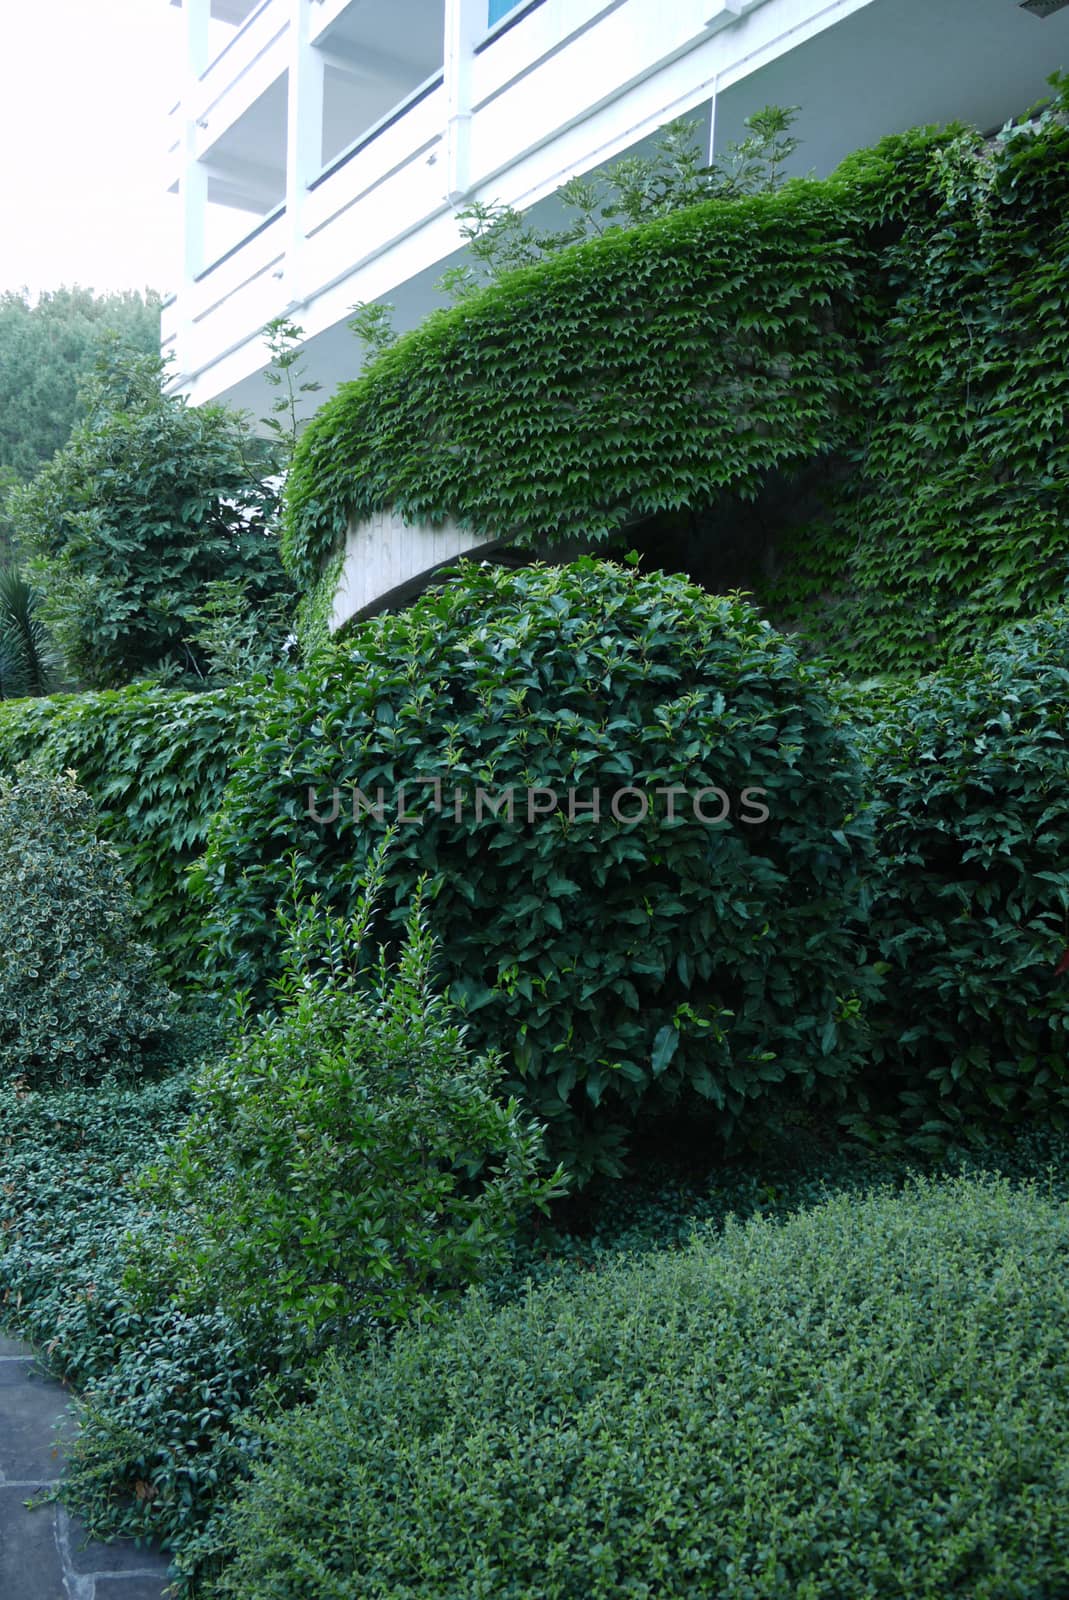 Gently trimmed green bushes against the white balcony of the sanatorium complex